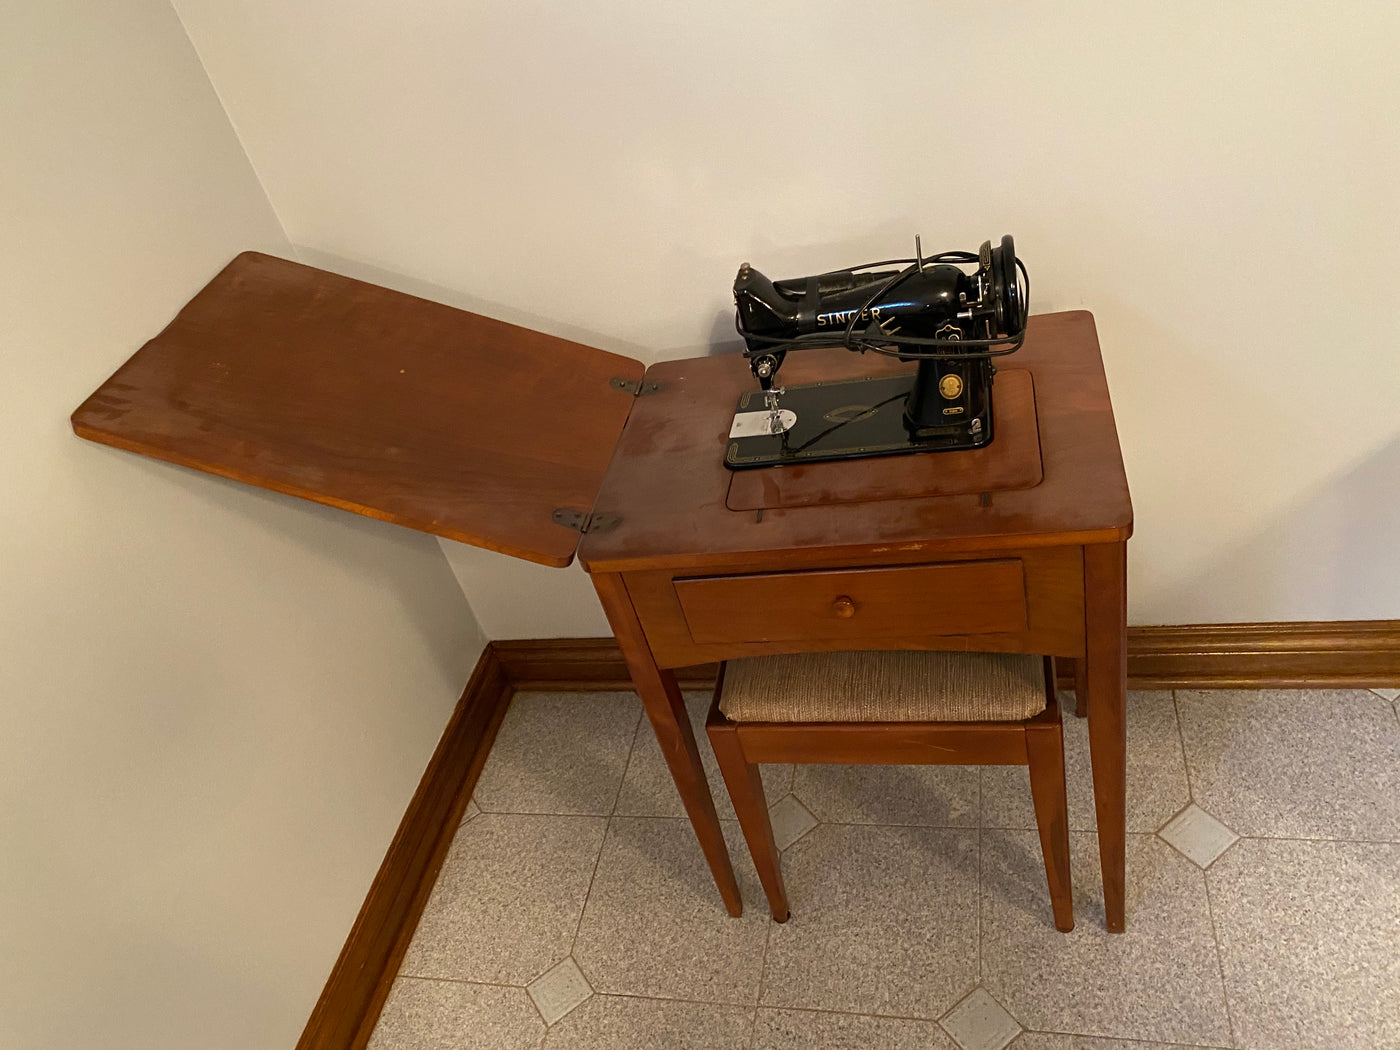 Vintage Singer Sewing Machine Table My Stuff Canada S Content And Estate Specialists